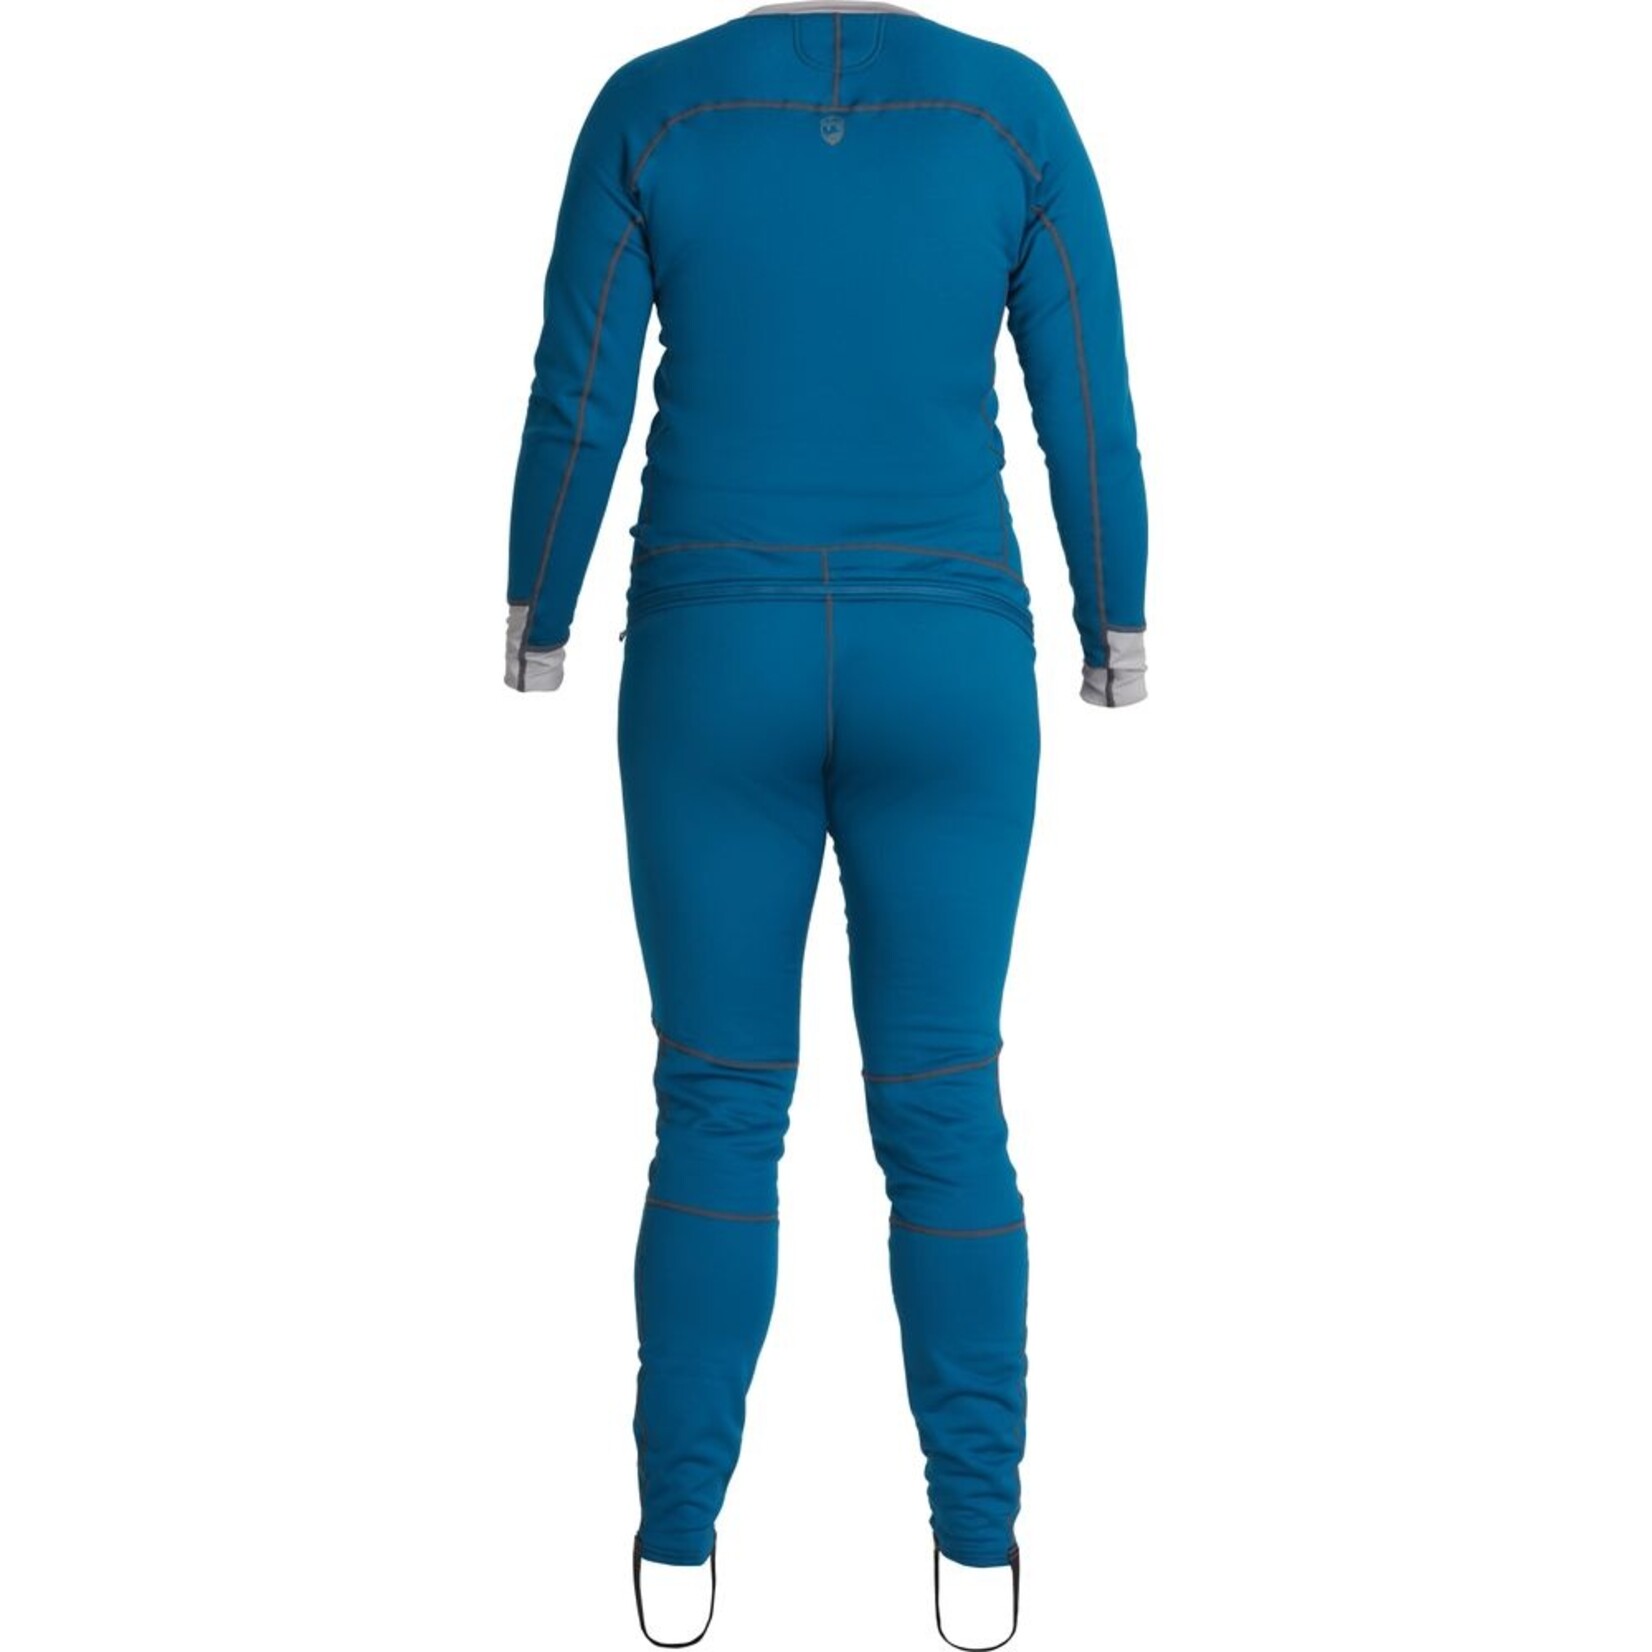 NRS, Inc NRS Women's Expedition Weight Union Suit